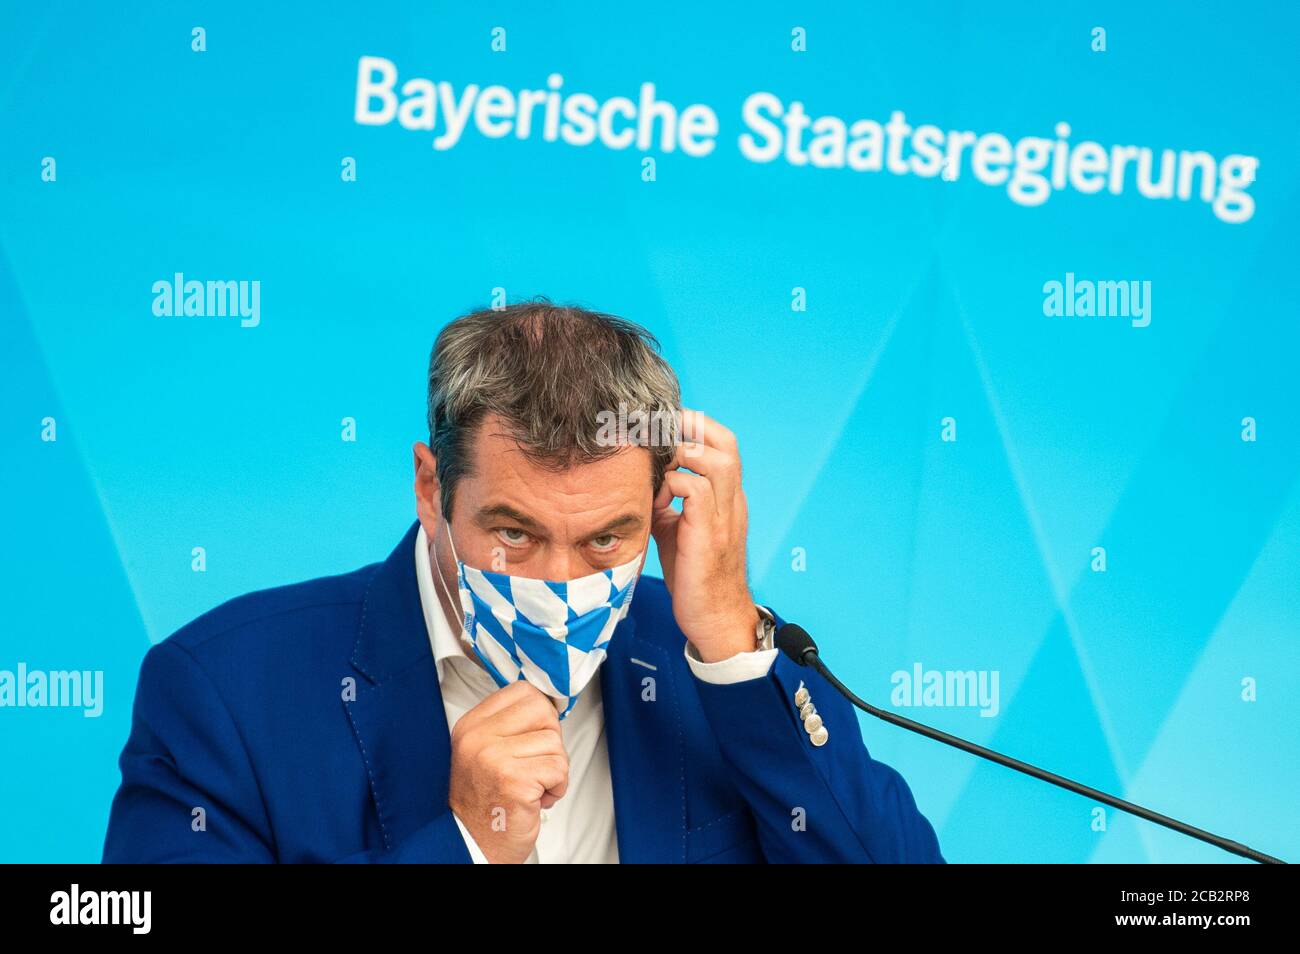 Bavarian State Prime Minister Markus Soeder attends a news conference in Nuremberg, Germany, August 10, 2020. Nicolas Armer/Pool via Reuters Stock Photo